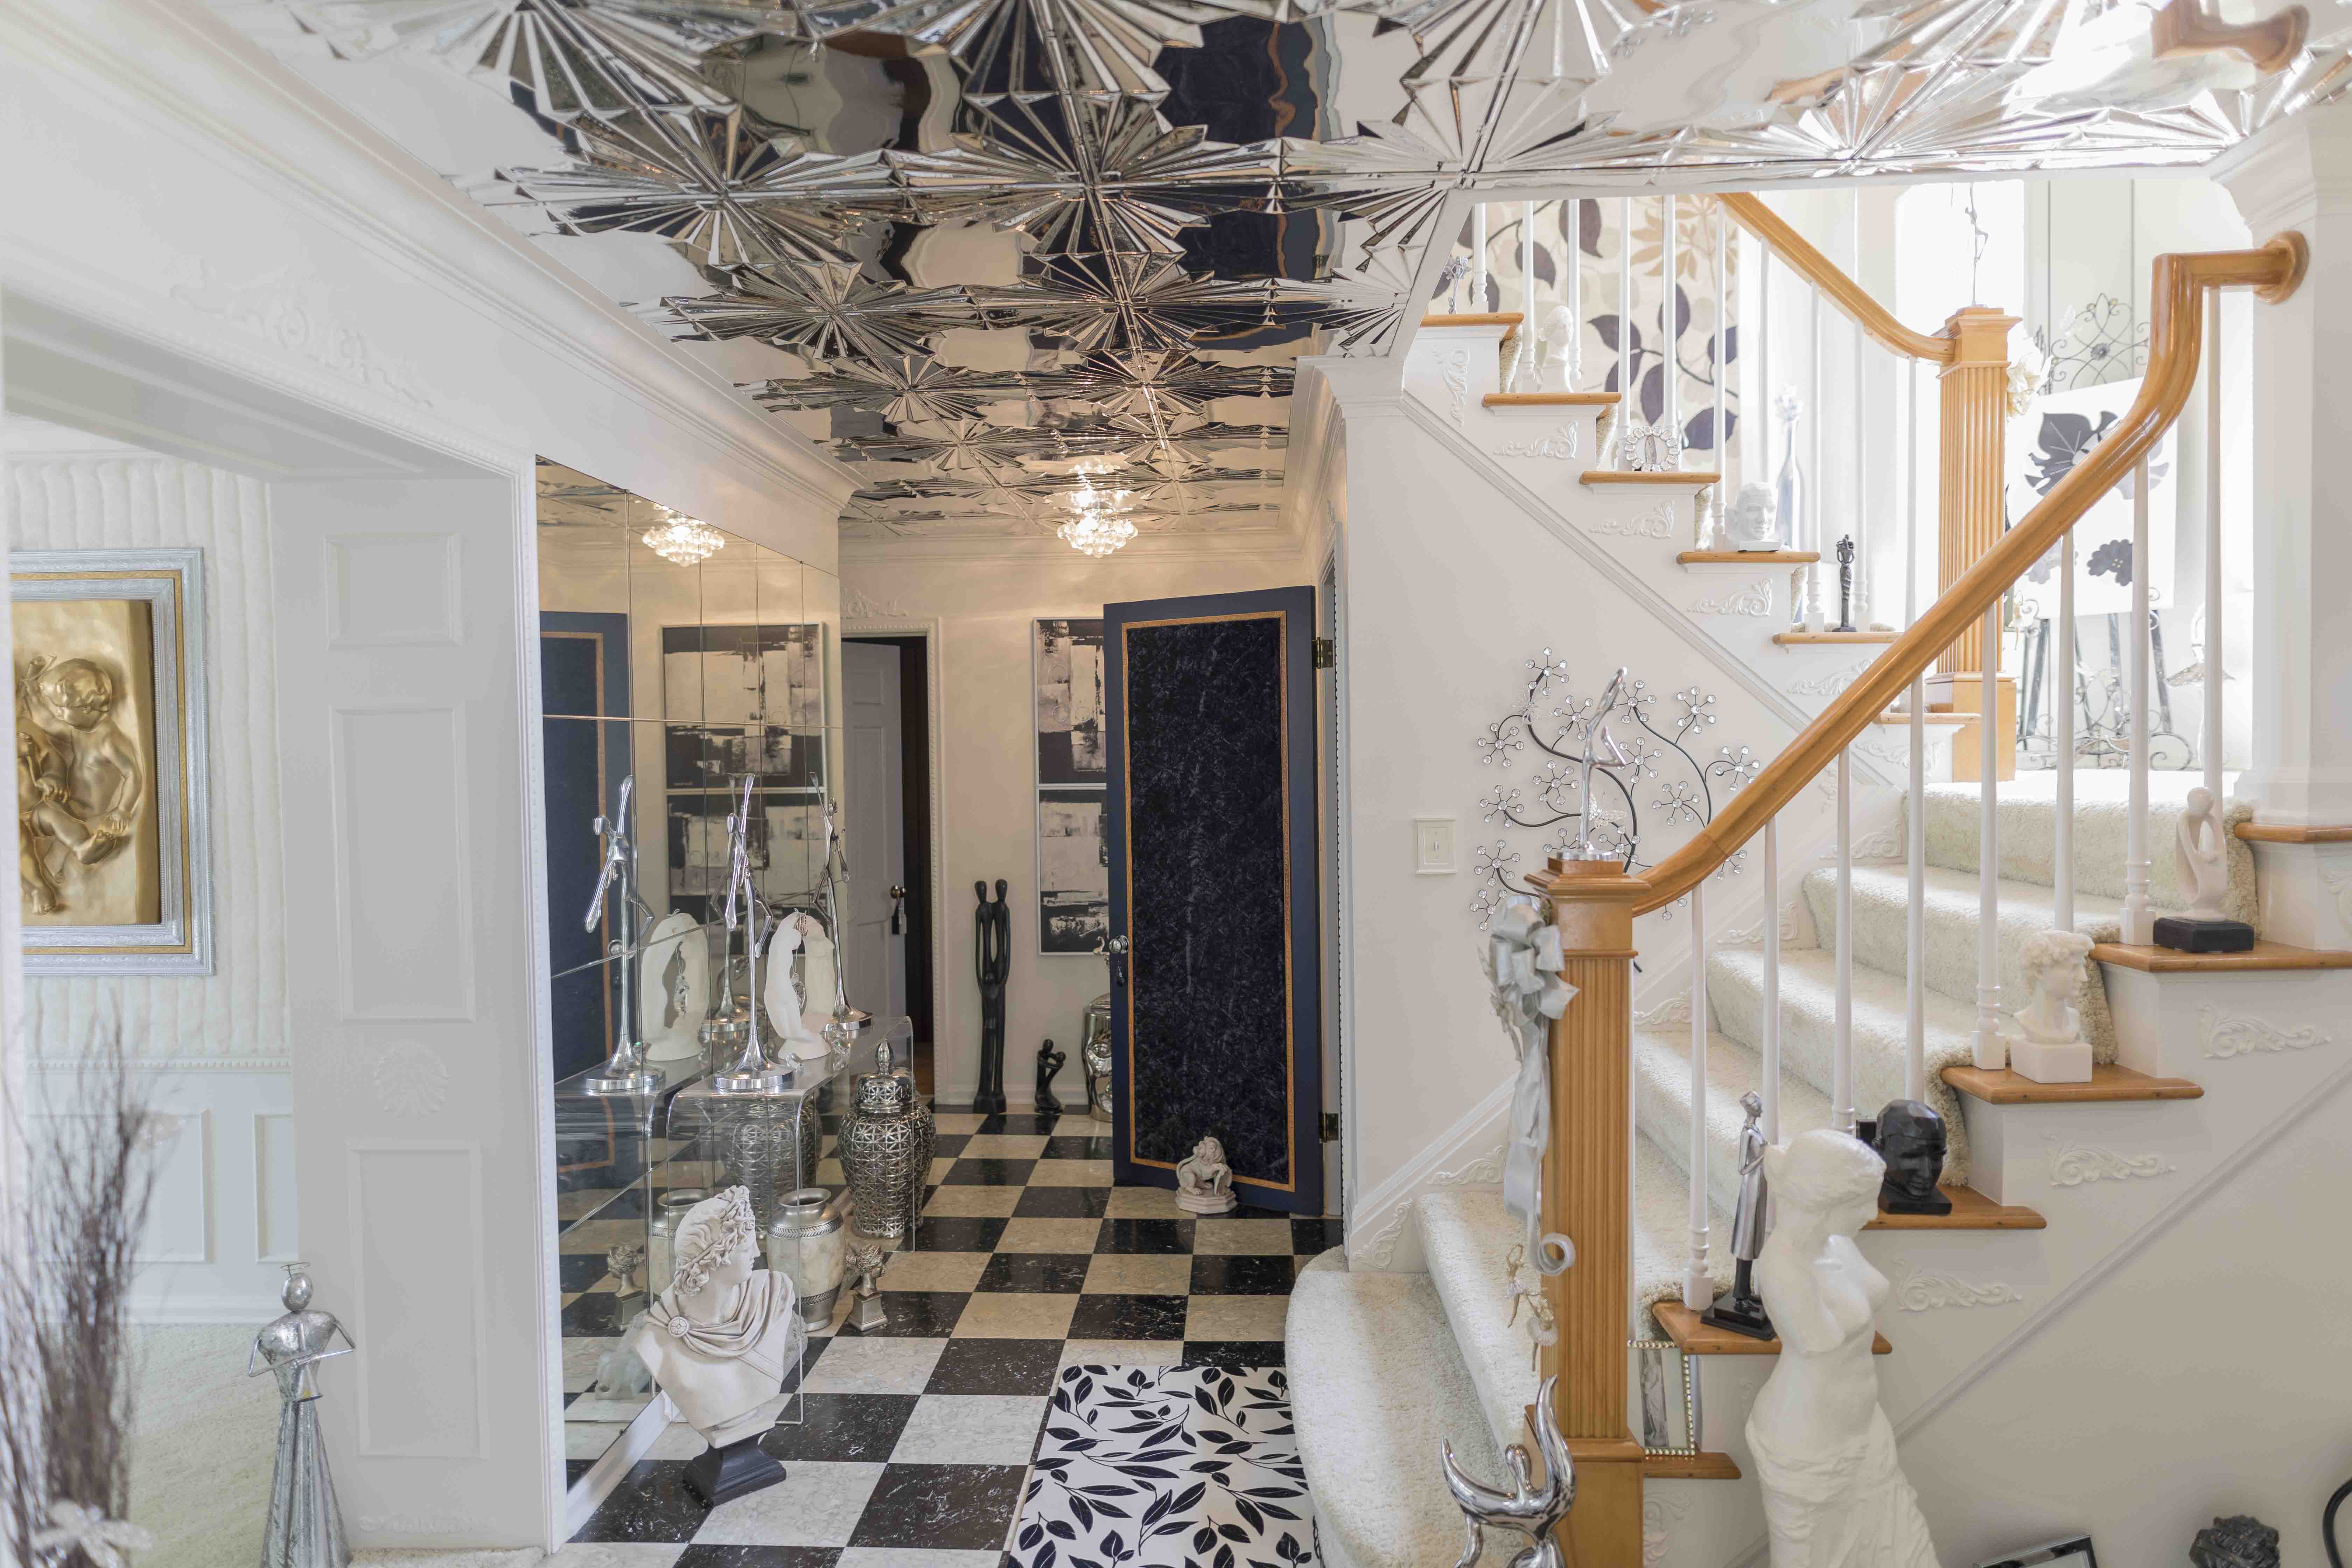 The ‘Mind-Blowing Flair’ Inside This House for Sale Is Driving the Internet Crazy